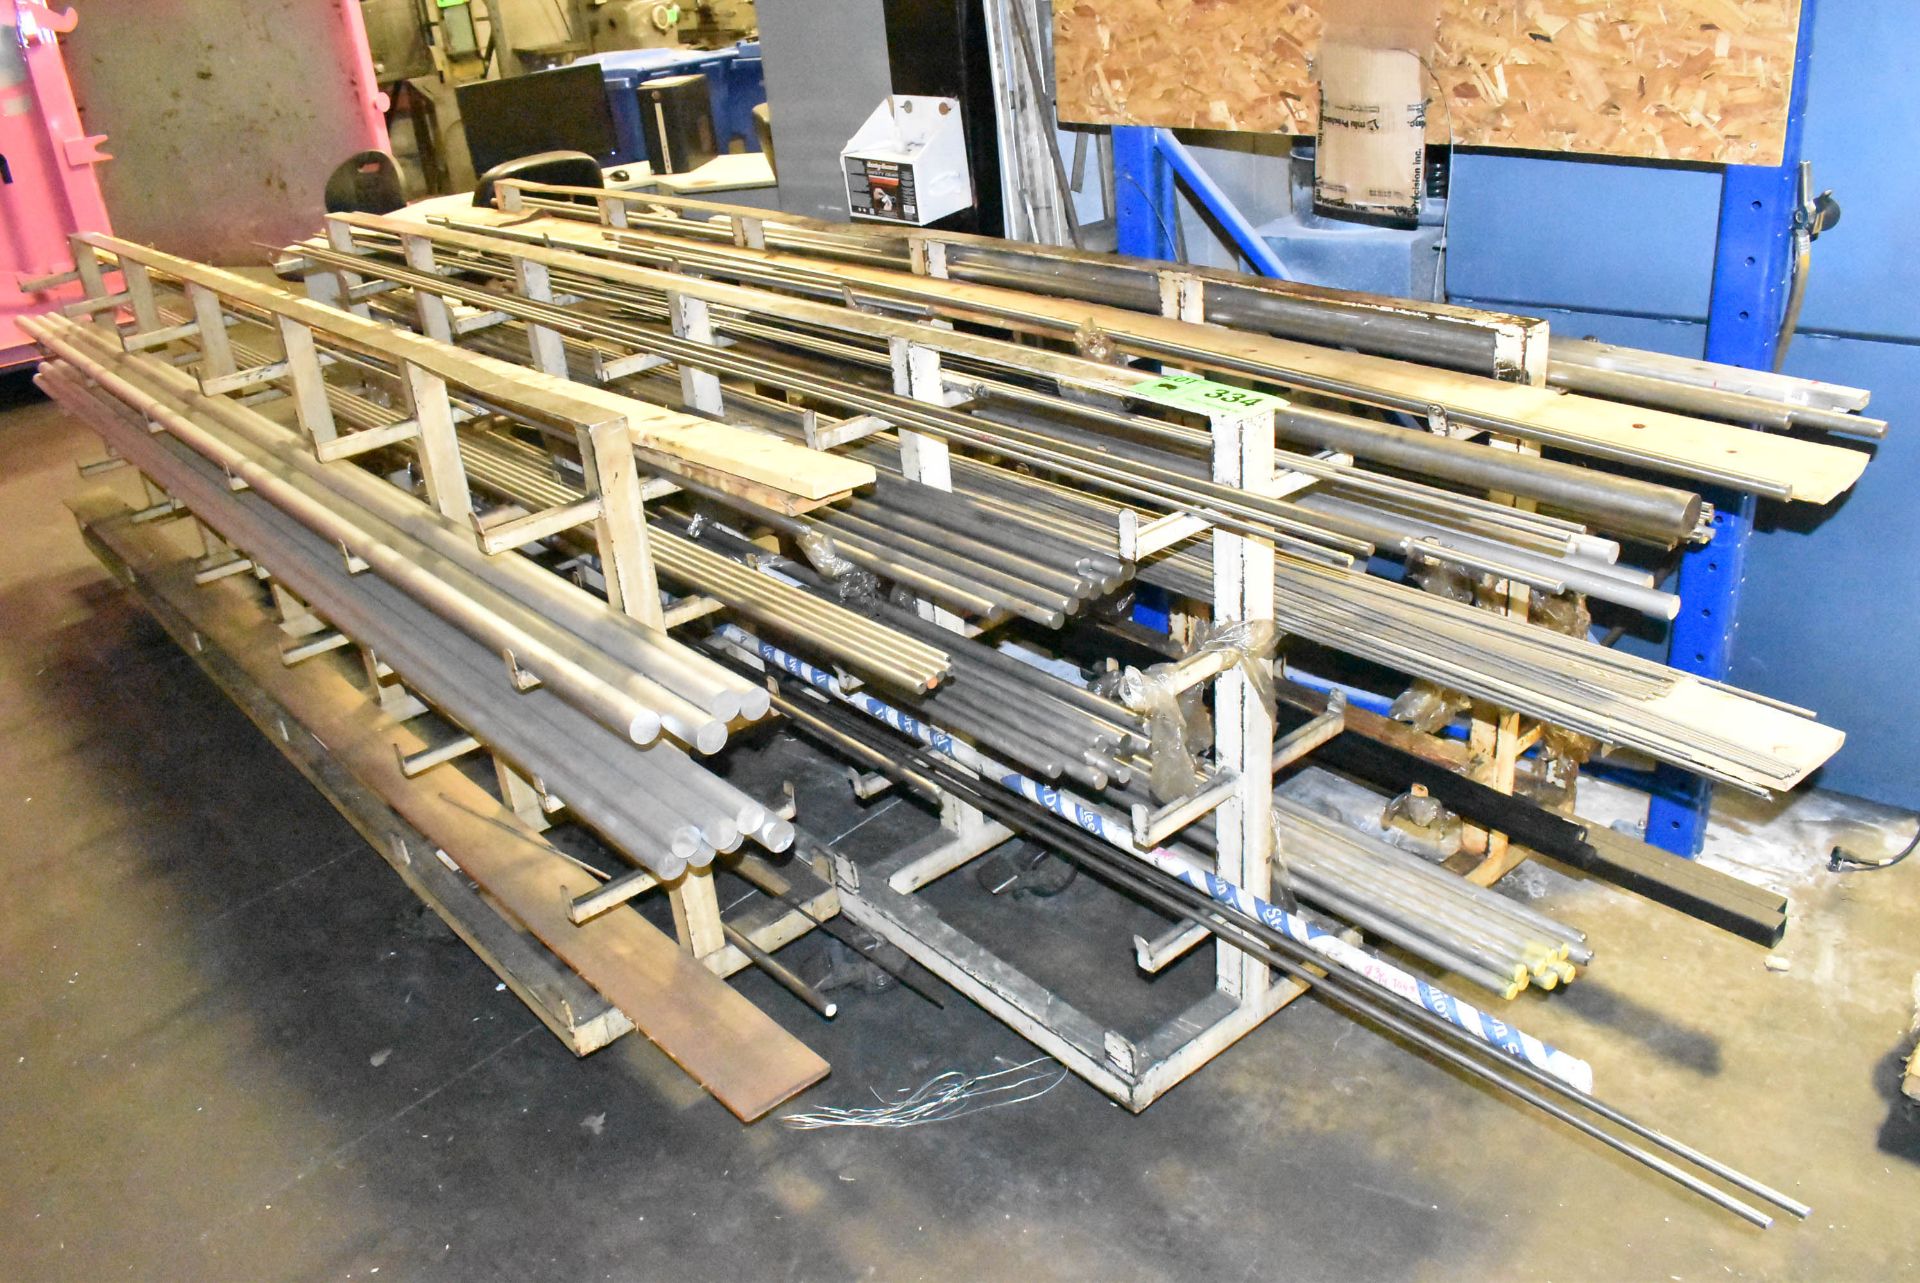 LOT/ CONTENTS OF (3) RACKS CONSISTING OF FERROUS AND NON-FERROUS BAR STOCK (RACKS NOT INCLUDED)